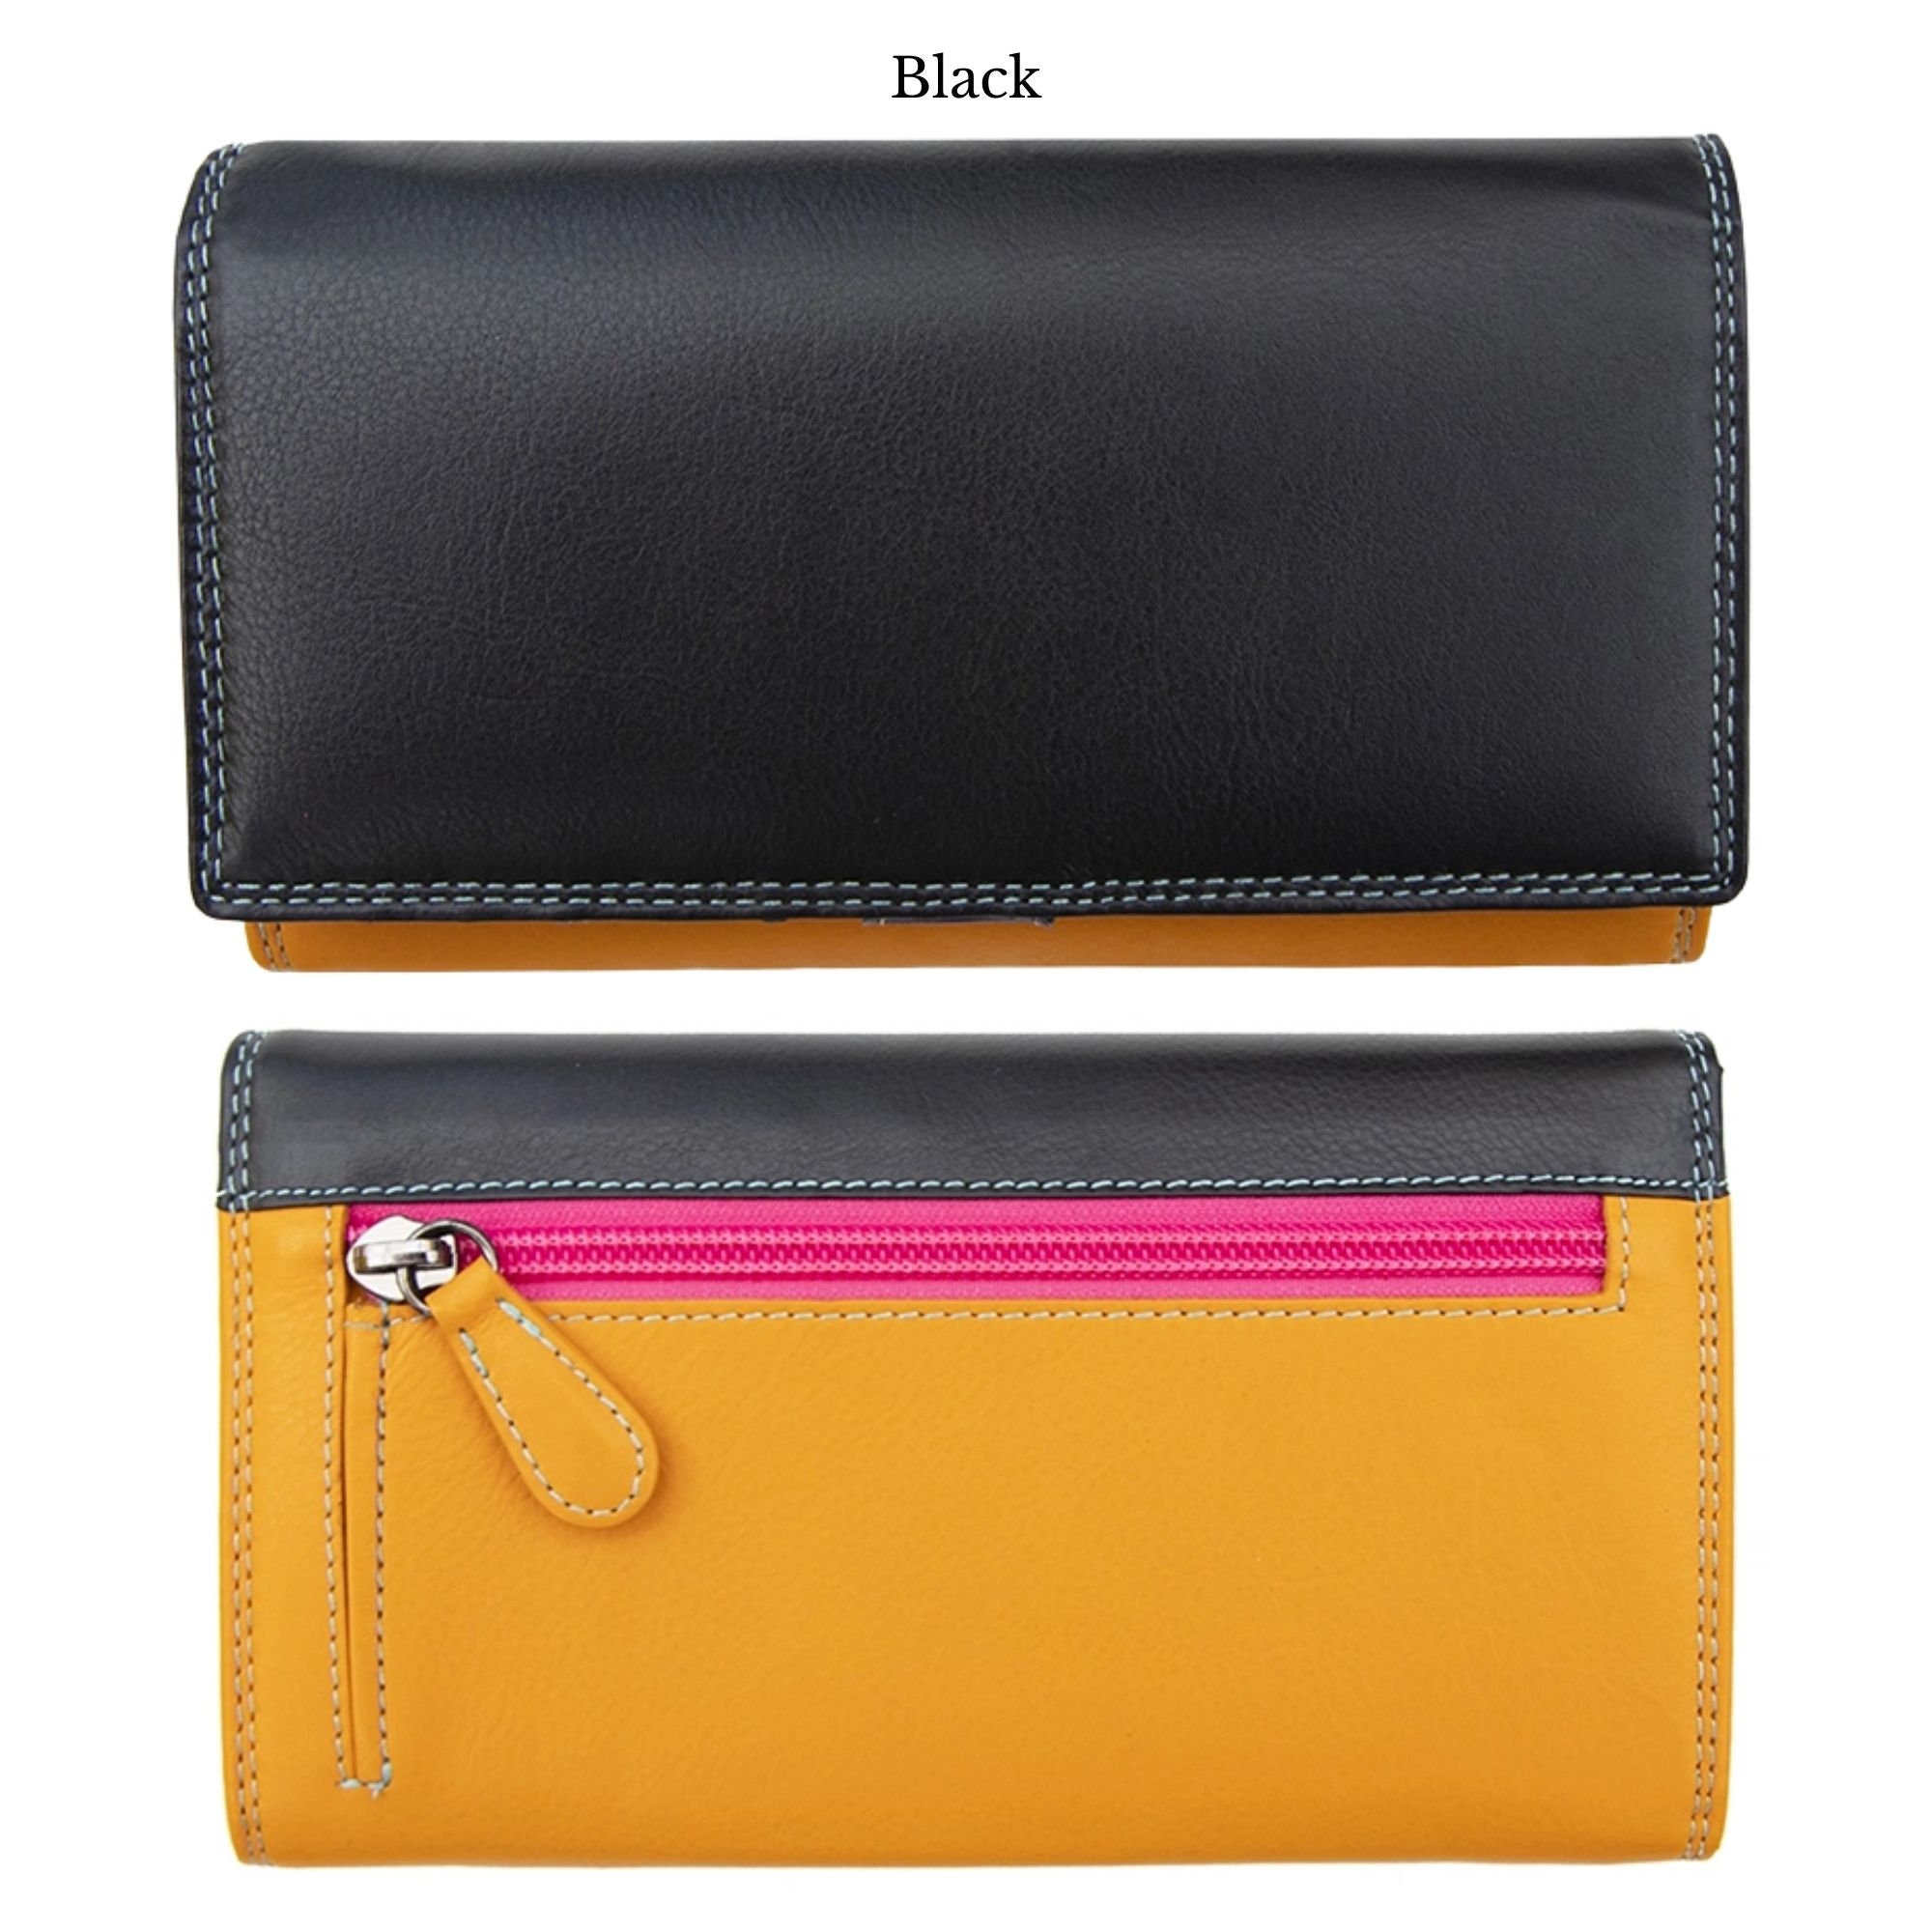 Golunski Women's Tri-Fold Flap Over Tab Leather Purse Wallet One Size Black  With Tropical at Amazon Women's Clothing store